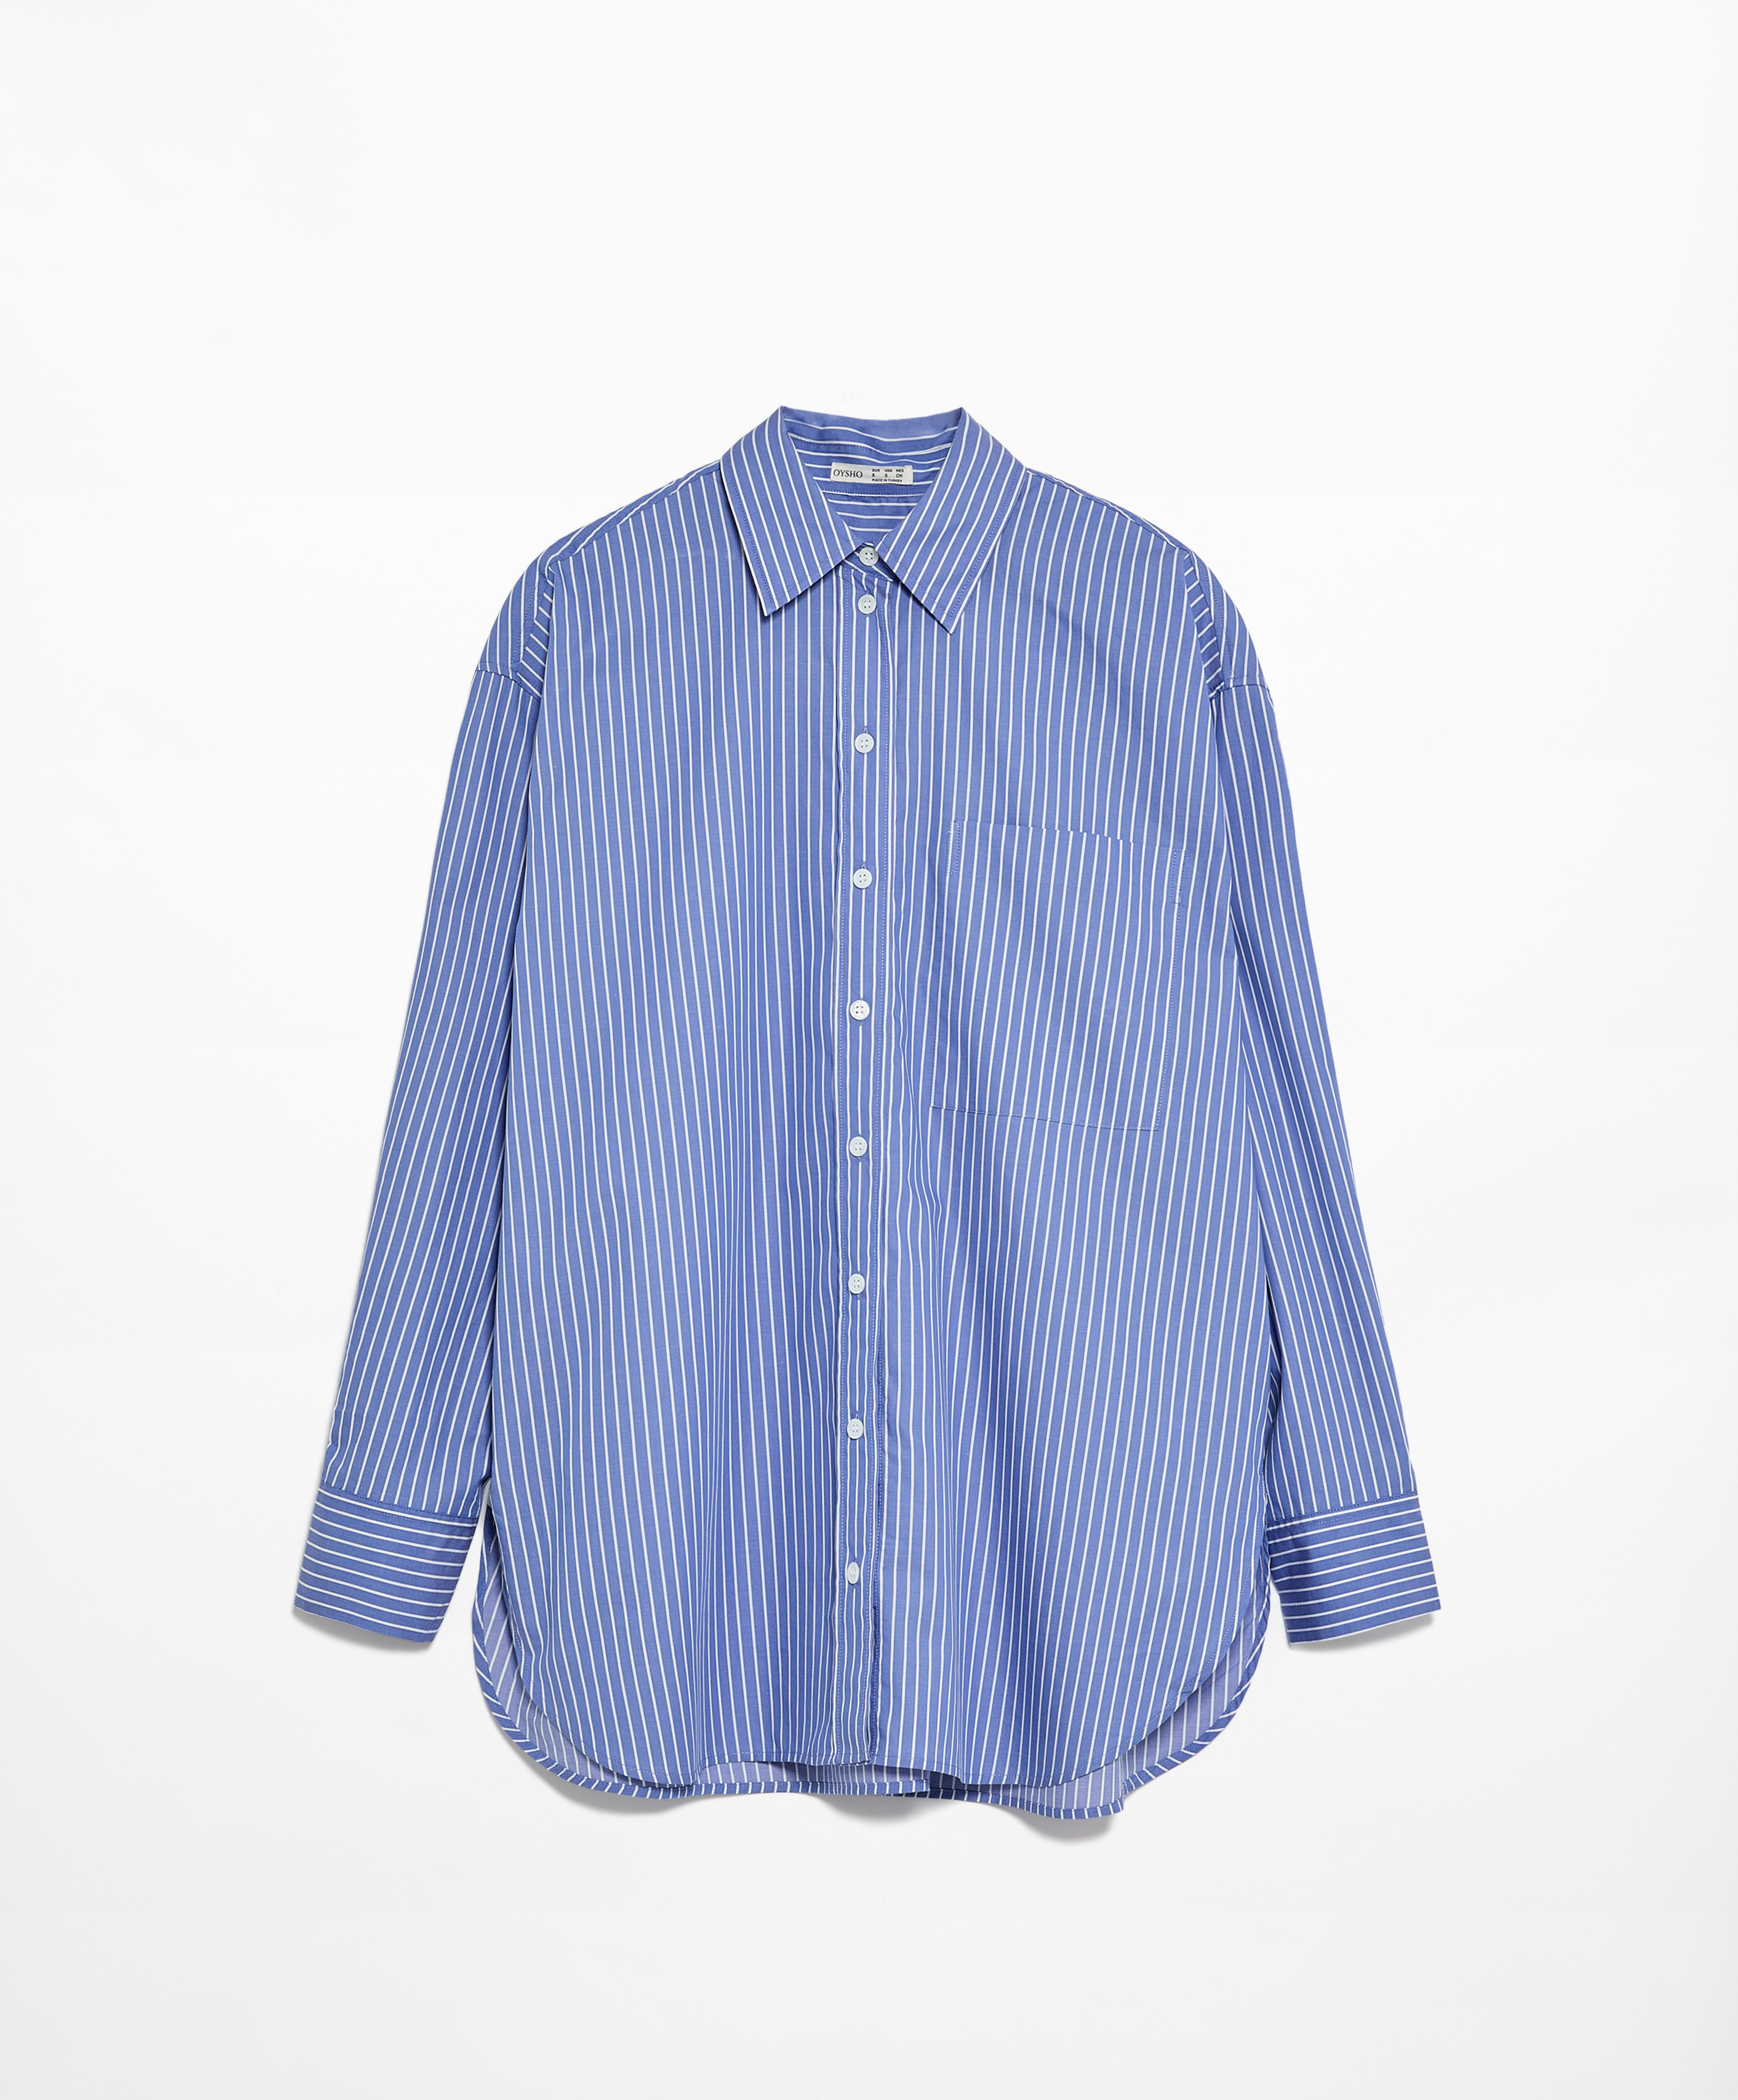 Striped 100% cotton long-sleeved shirt